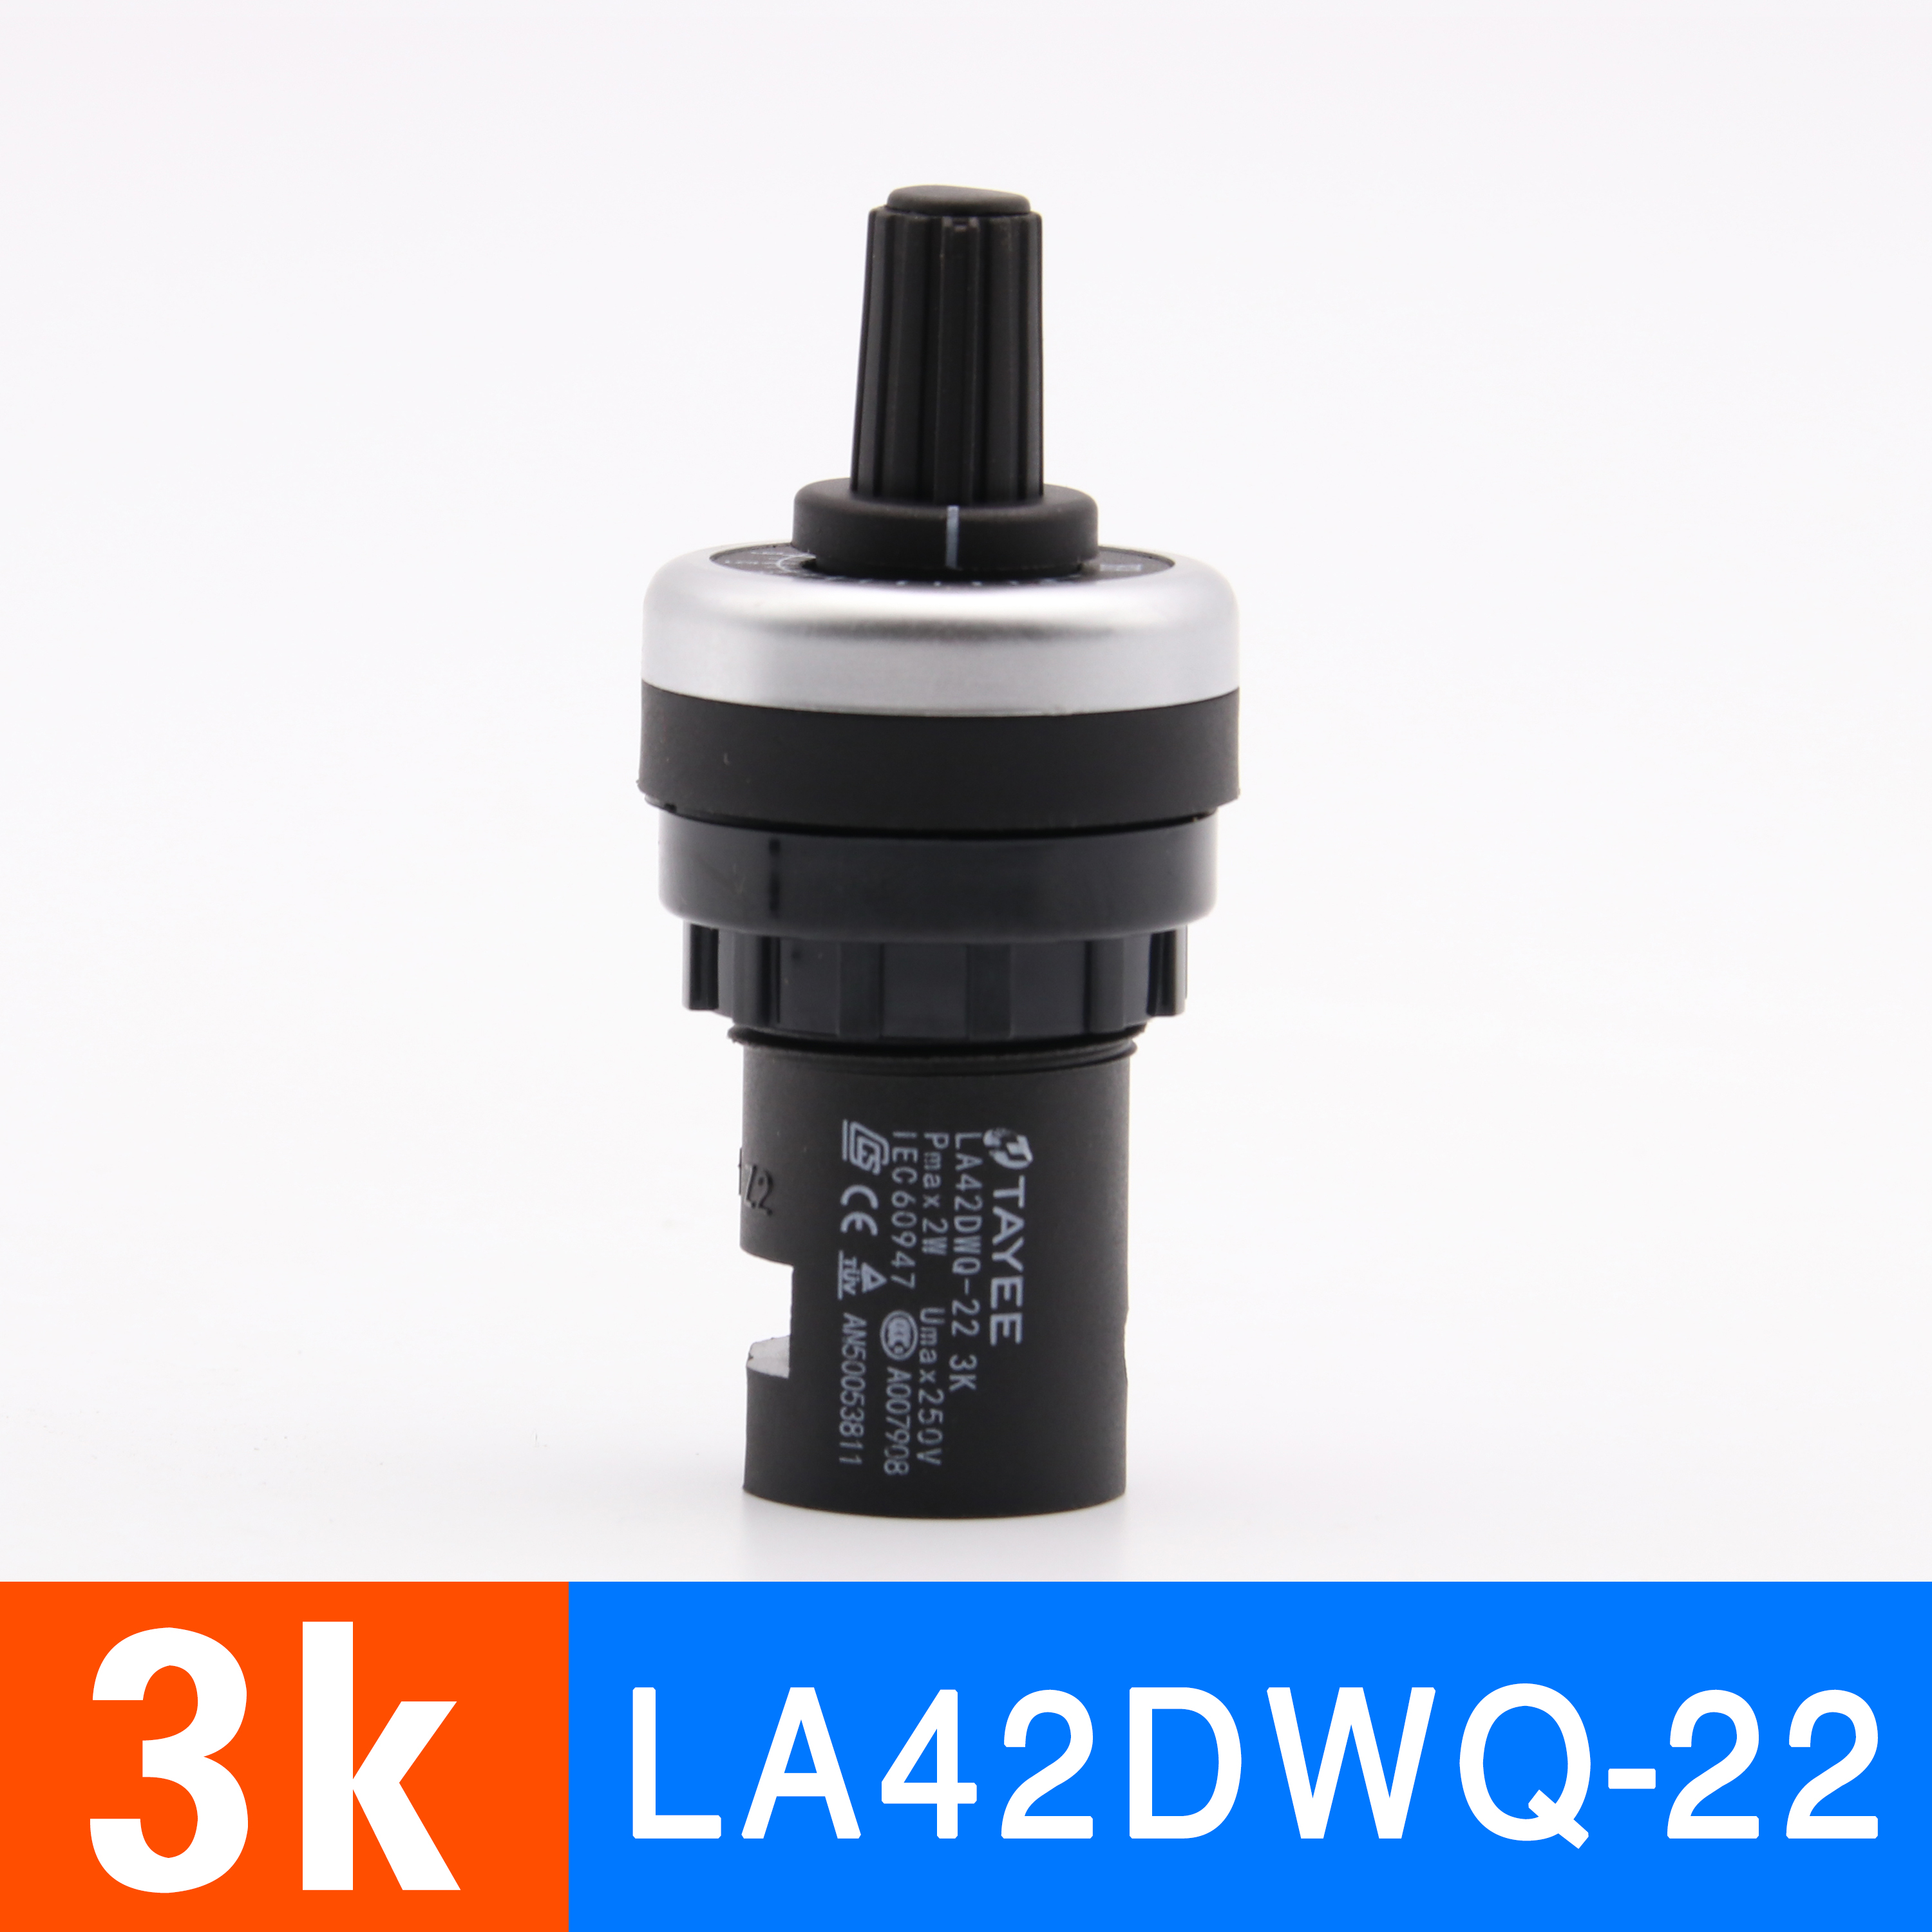 Genuine 3Kquality goods Shanghai Tianyi Frequency converter adjust speed potentiometer precise LA42DWQ-22 governor 22mm5K10K